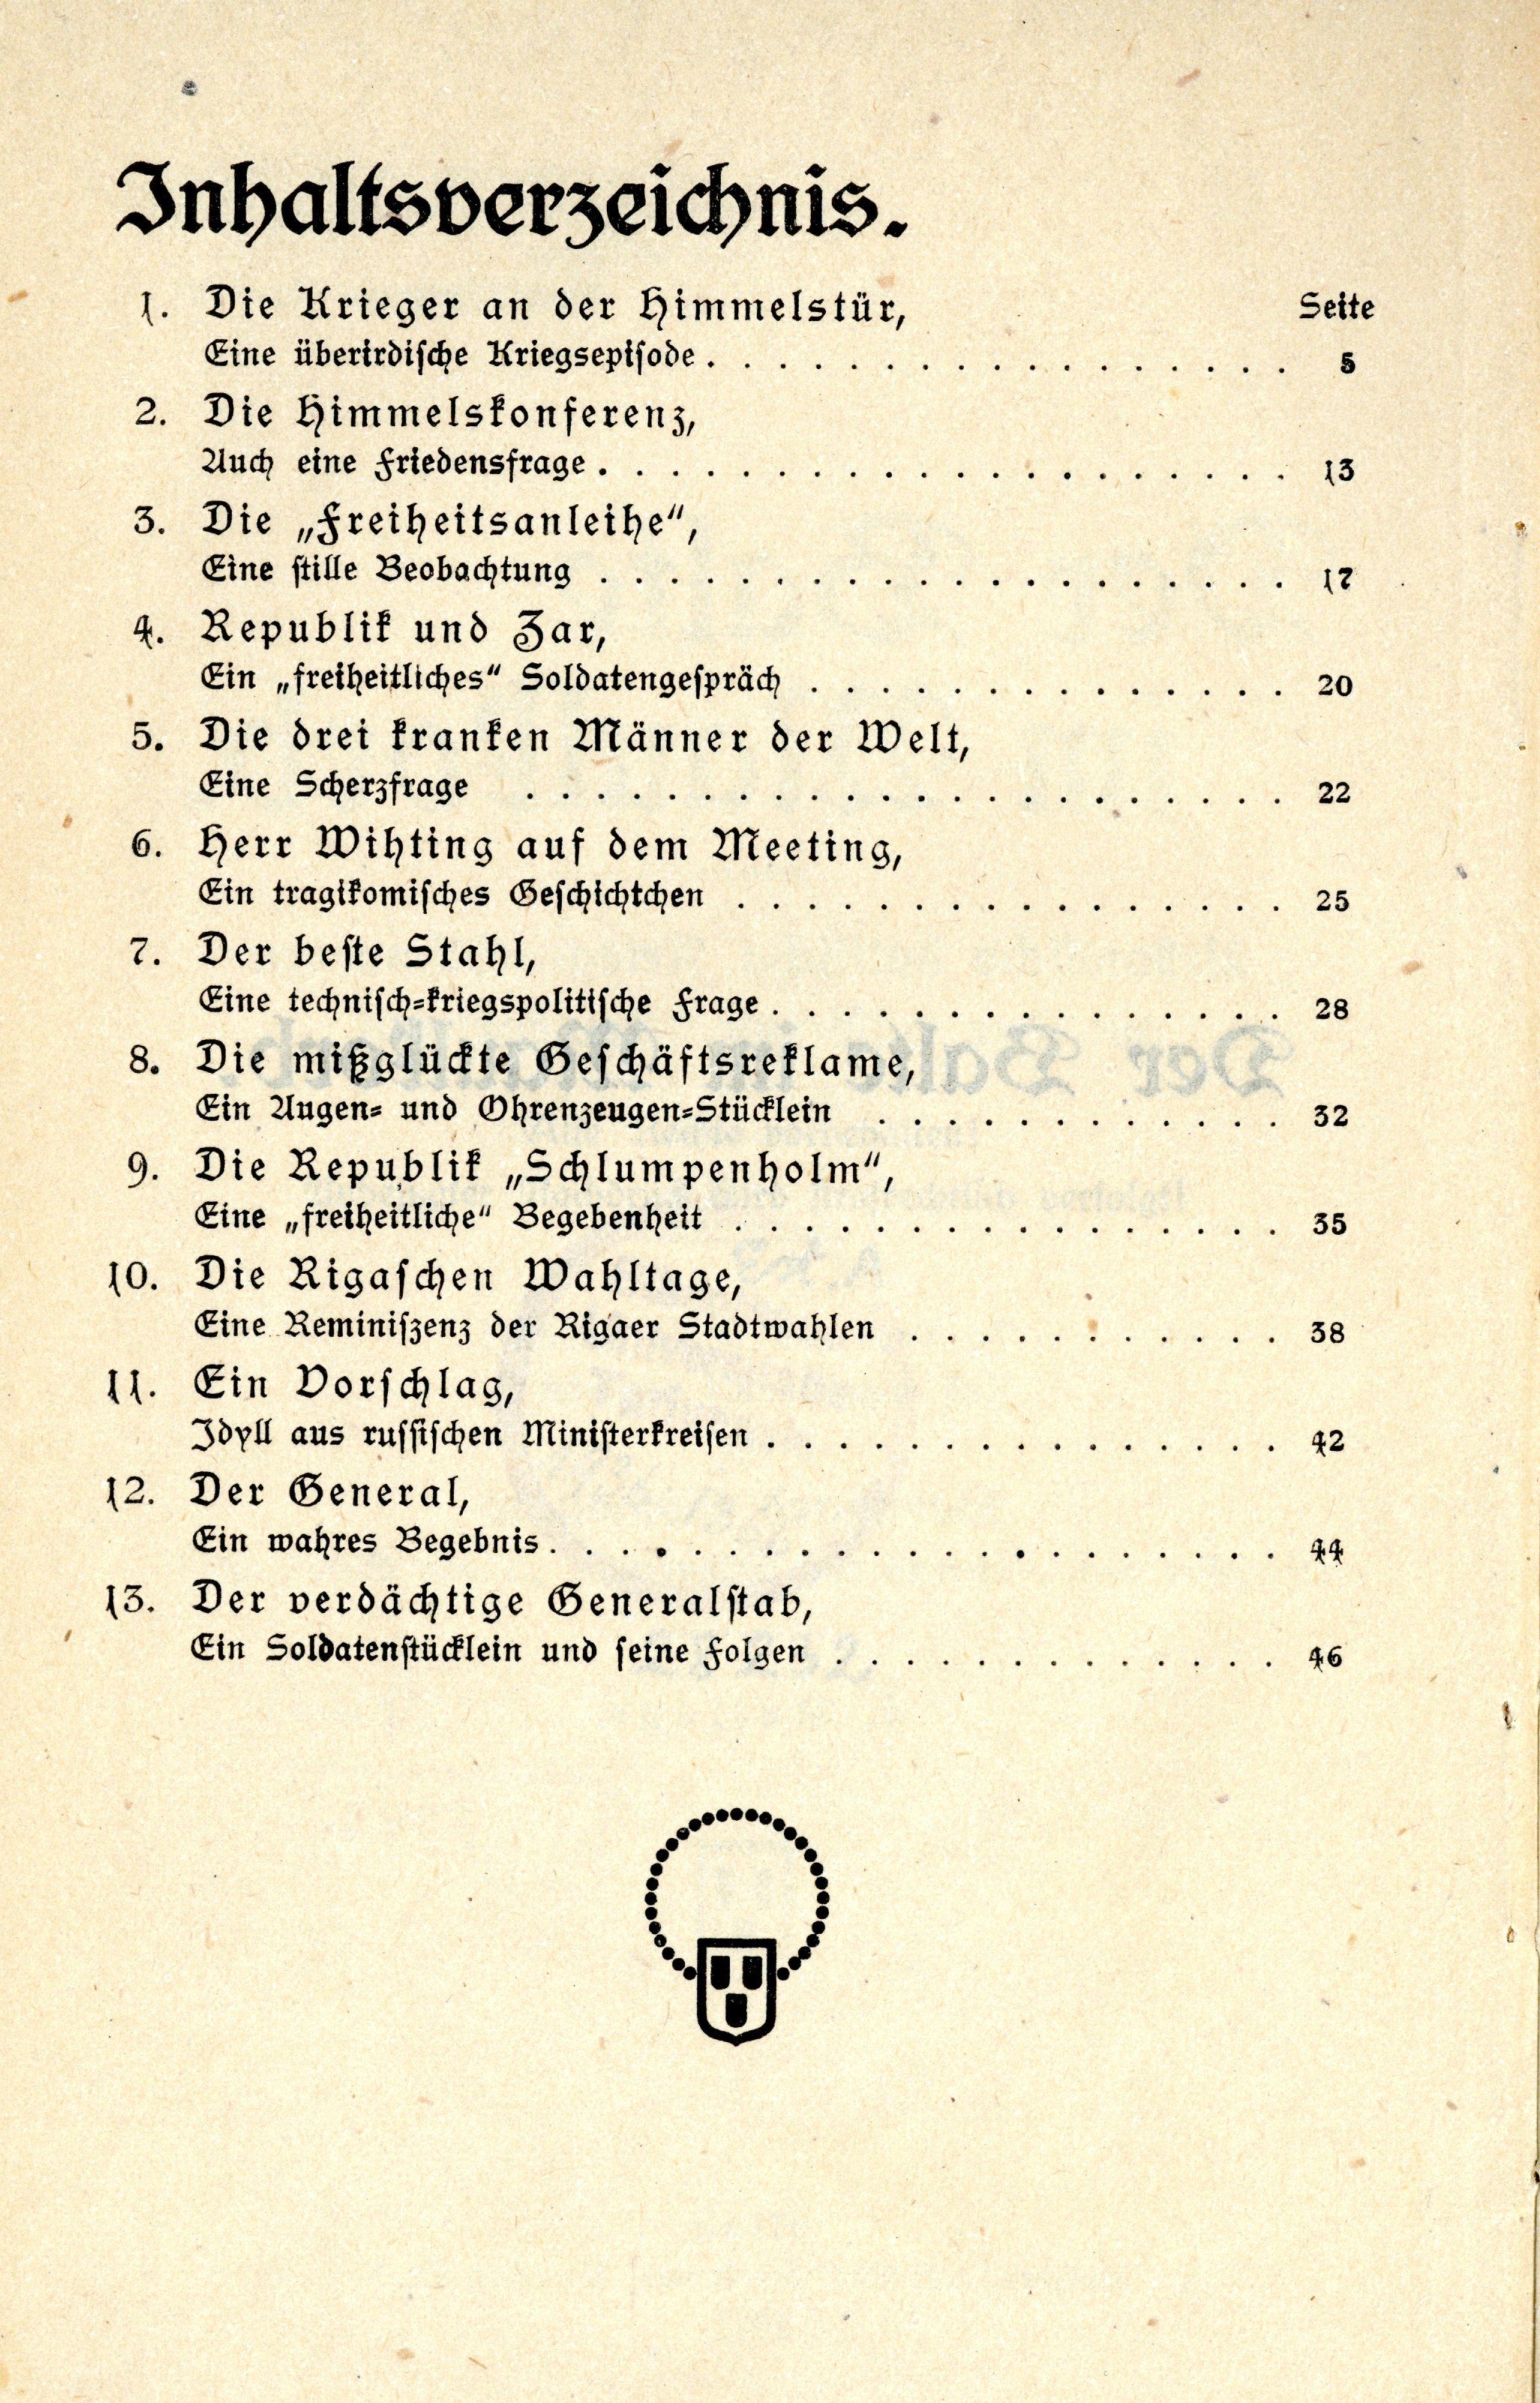 Der Balte im Maulkorb (1917) | 5. Table of contents